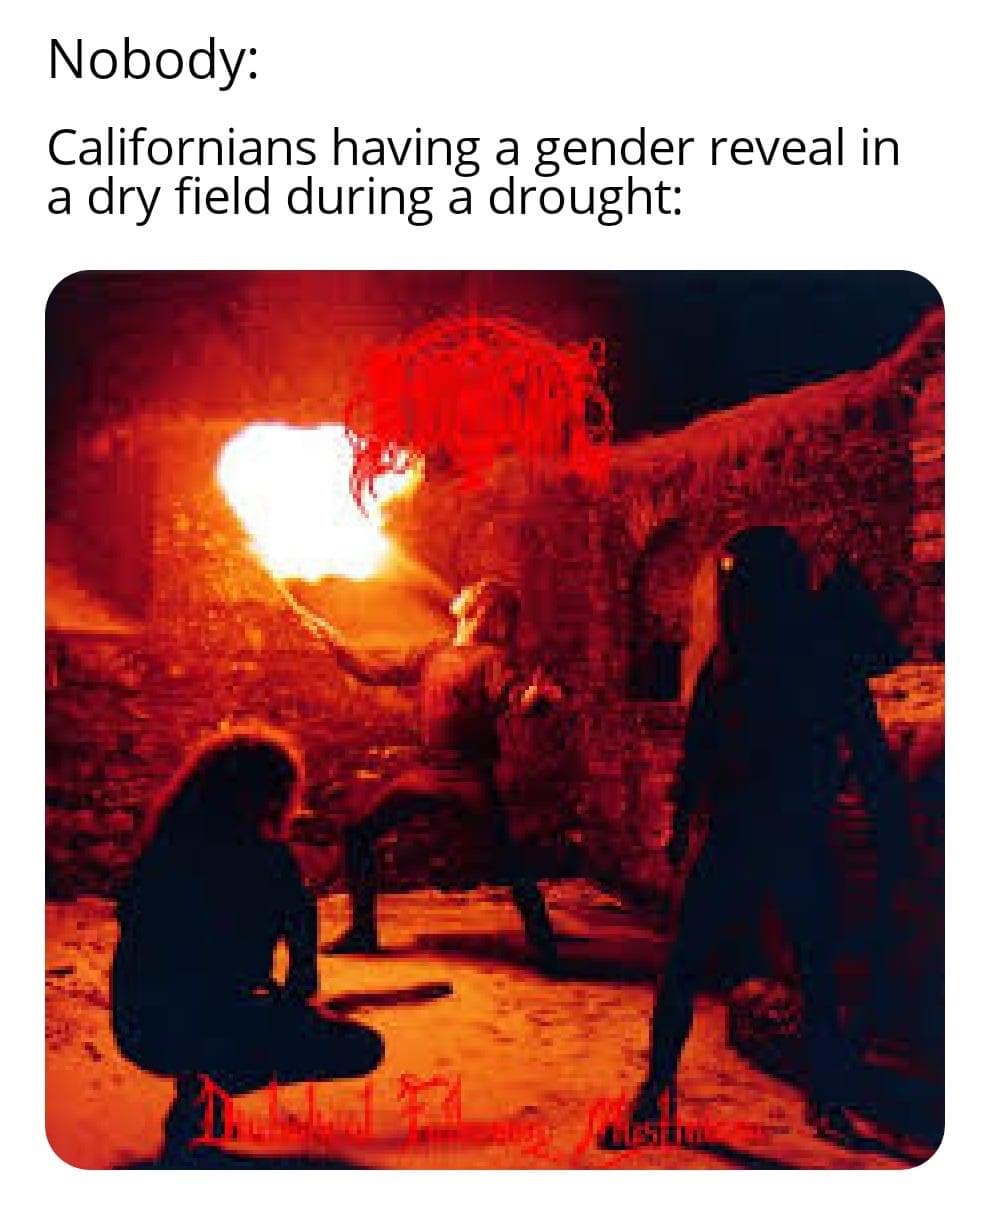 immortal diabolical fullmoon mysticism - Nobody Californians having a gender reveal in a dry field during a drought